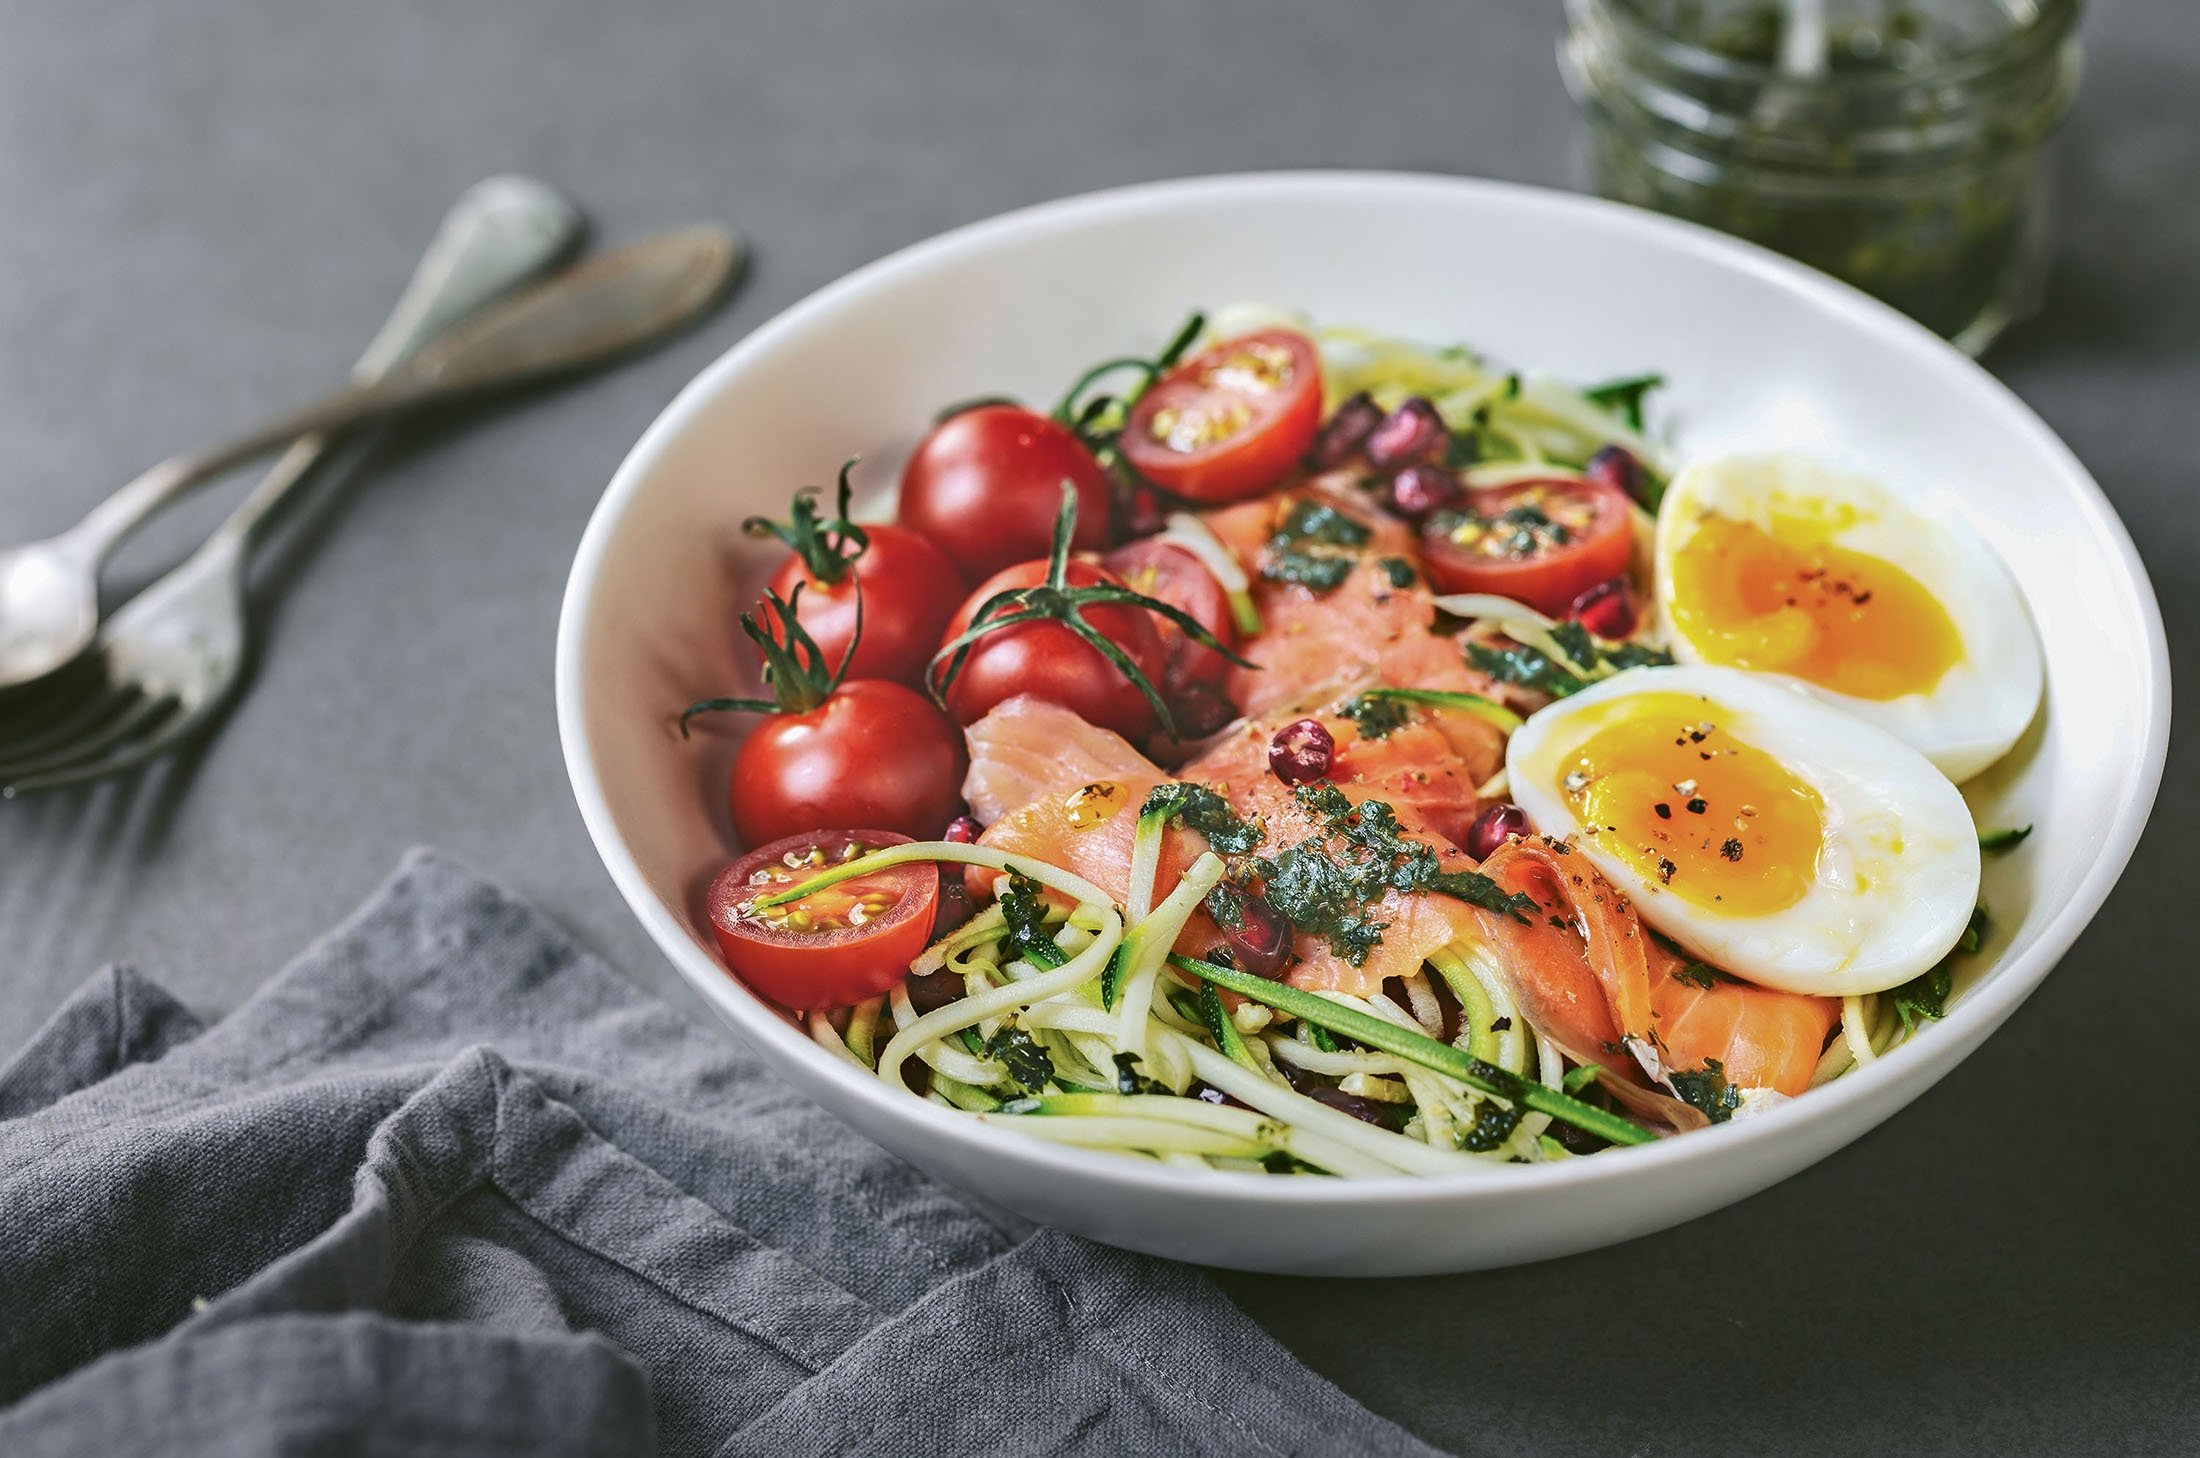 Zucchini zoodles with salmon may seem more elaborate than straight spaghetti but it’s just as quick to prepare. (Shutterstock Photo)